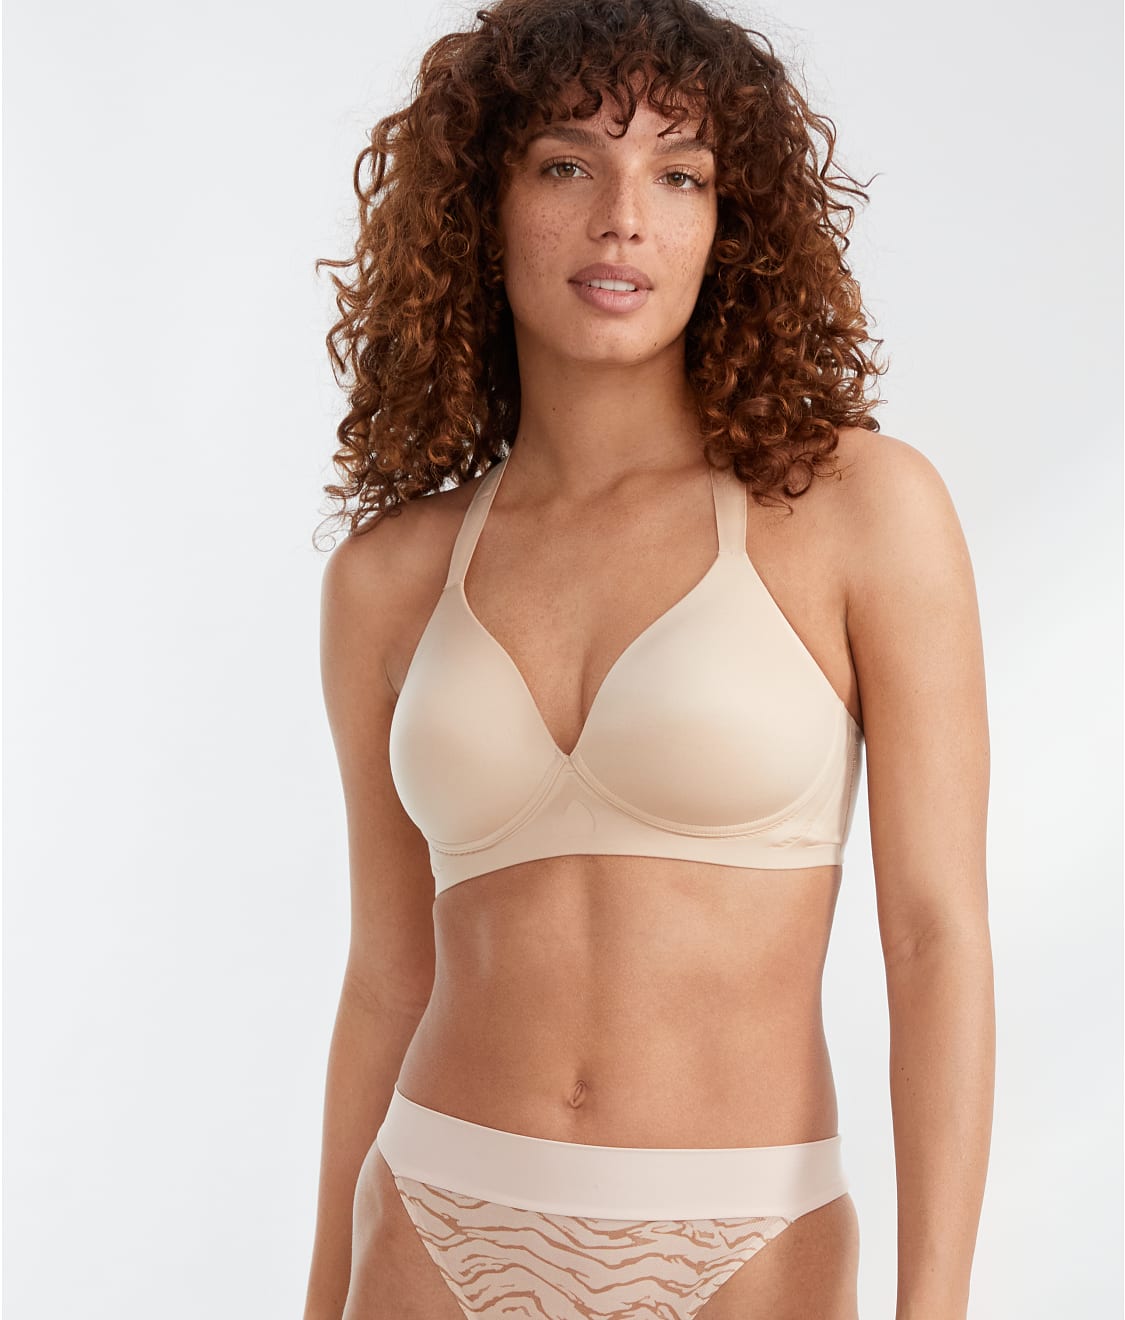 Wacoal Ultimate Side Smoother Wire Free Contour T-Shirt Bra